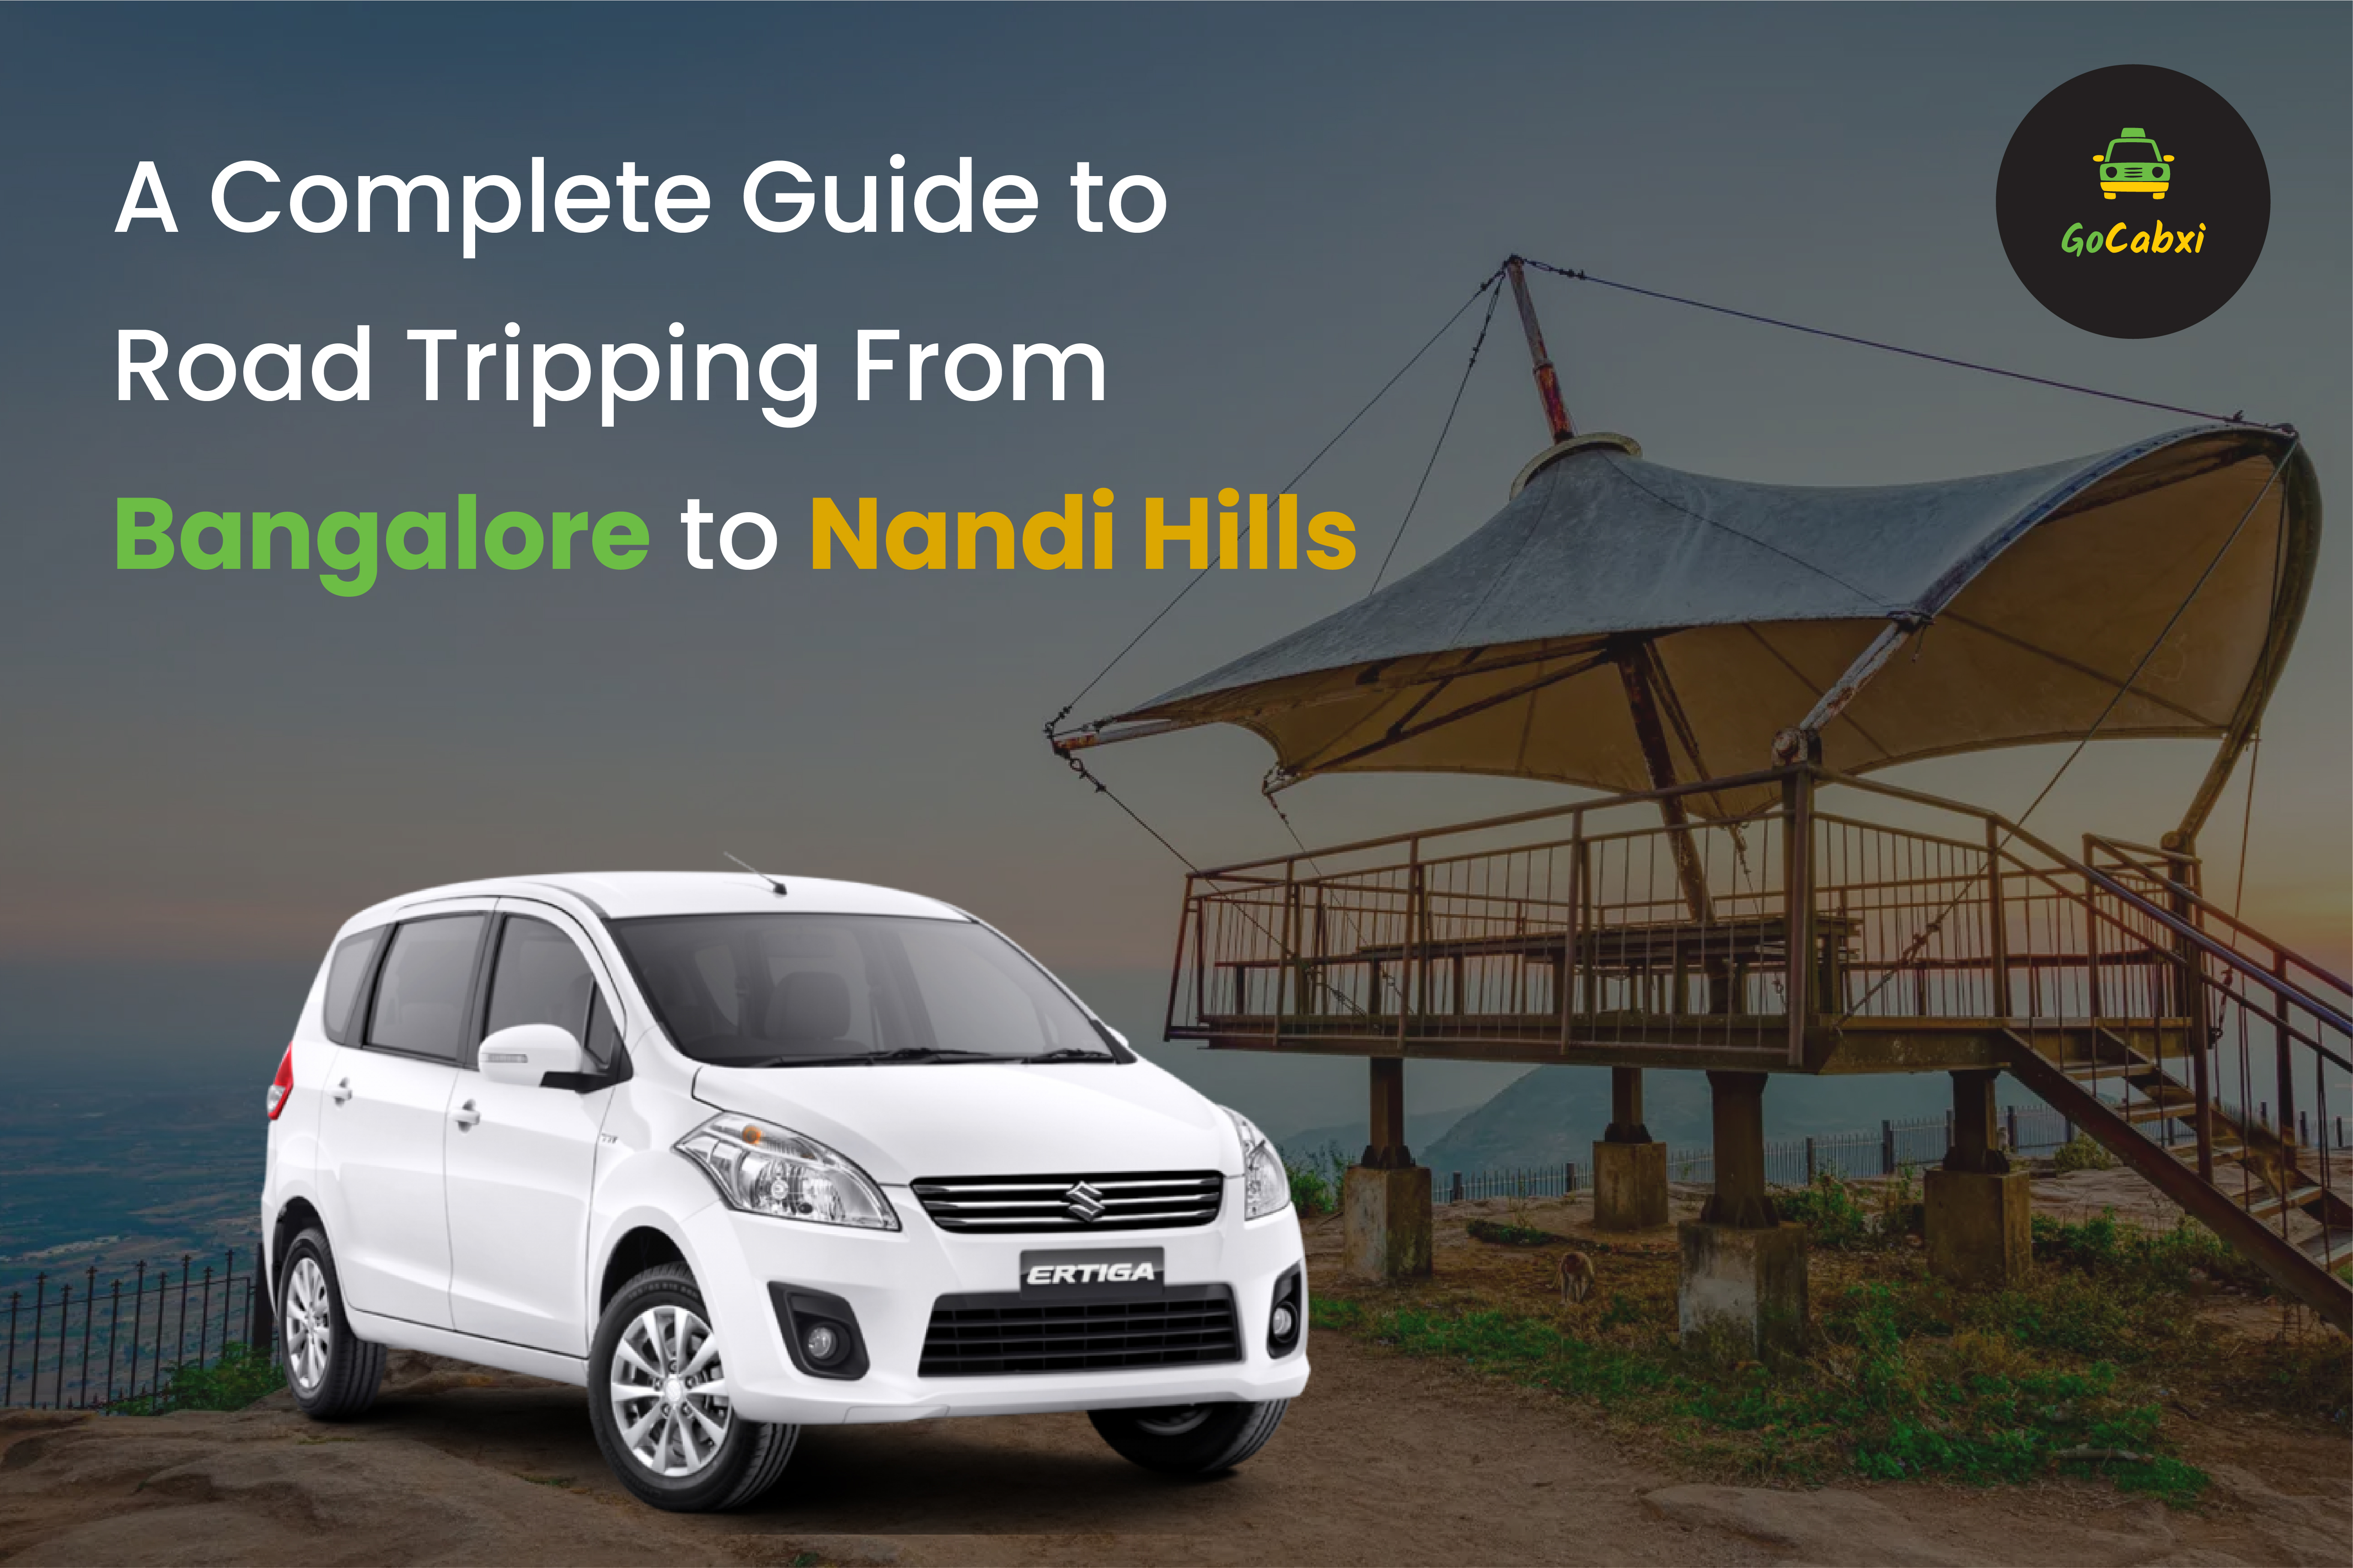 A Complete Guide to Road Tripping From Bangalore to Nandi Hills